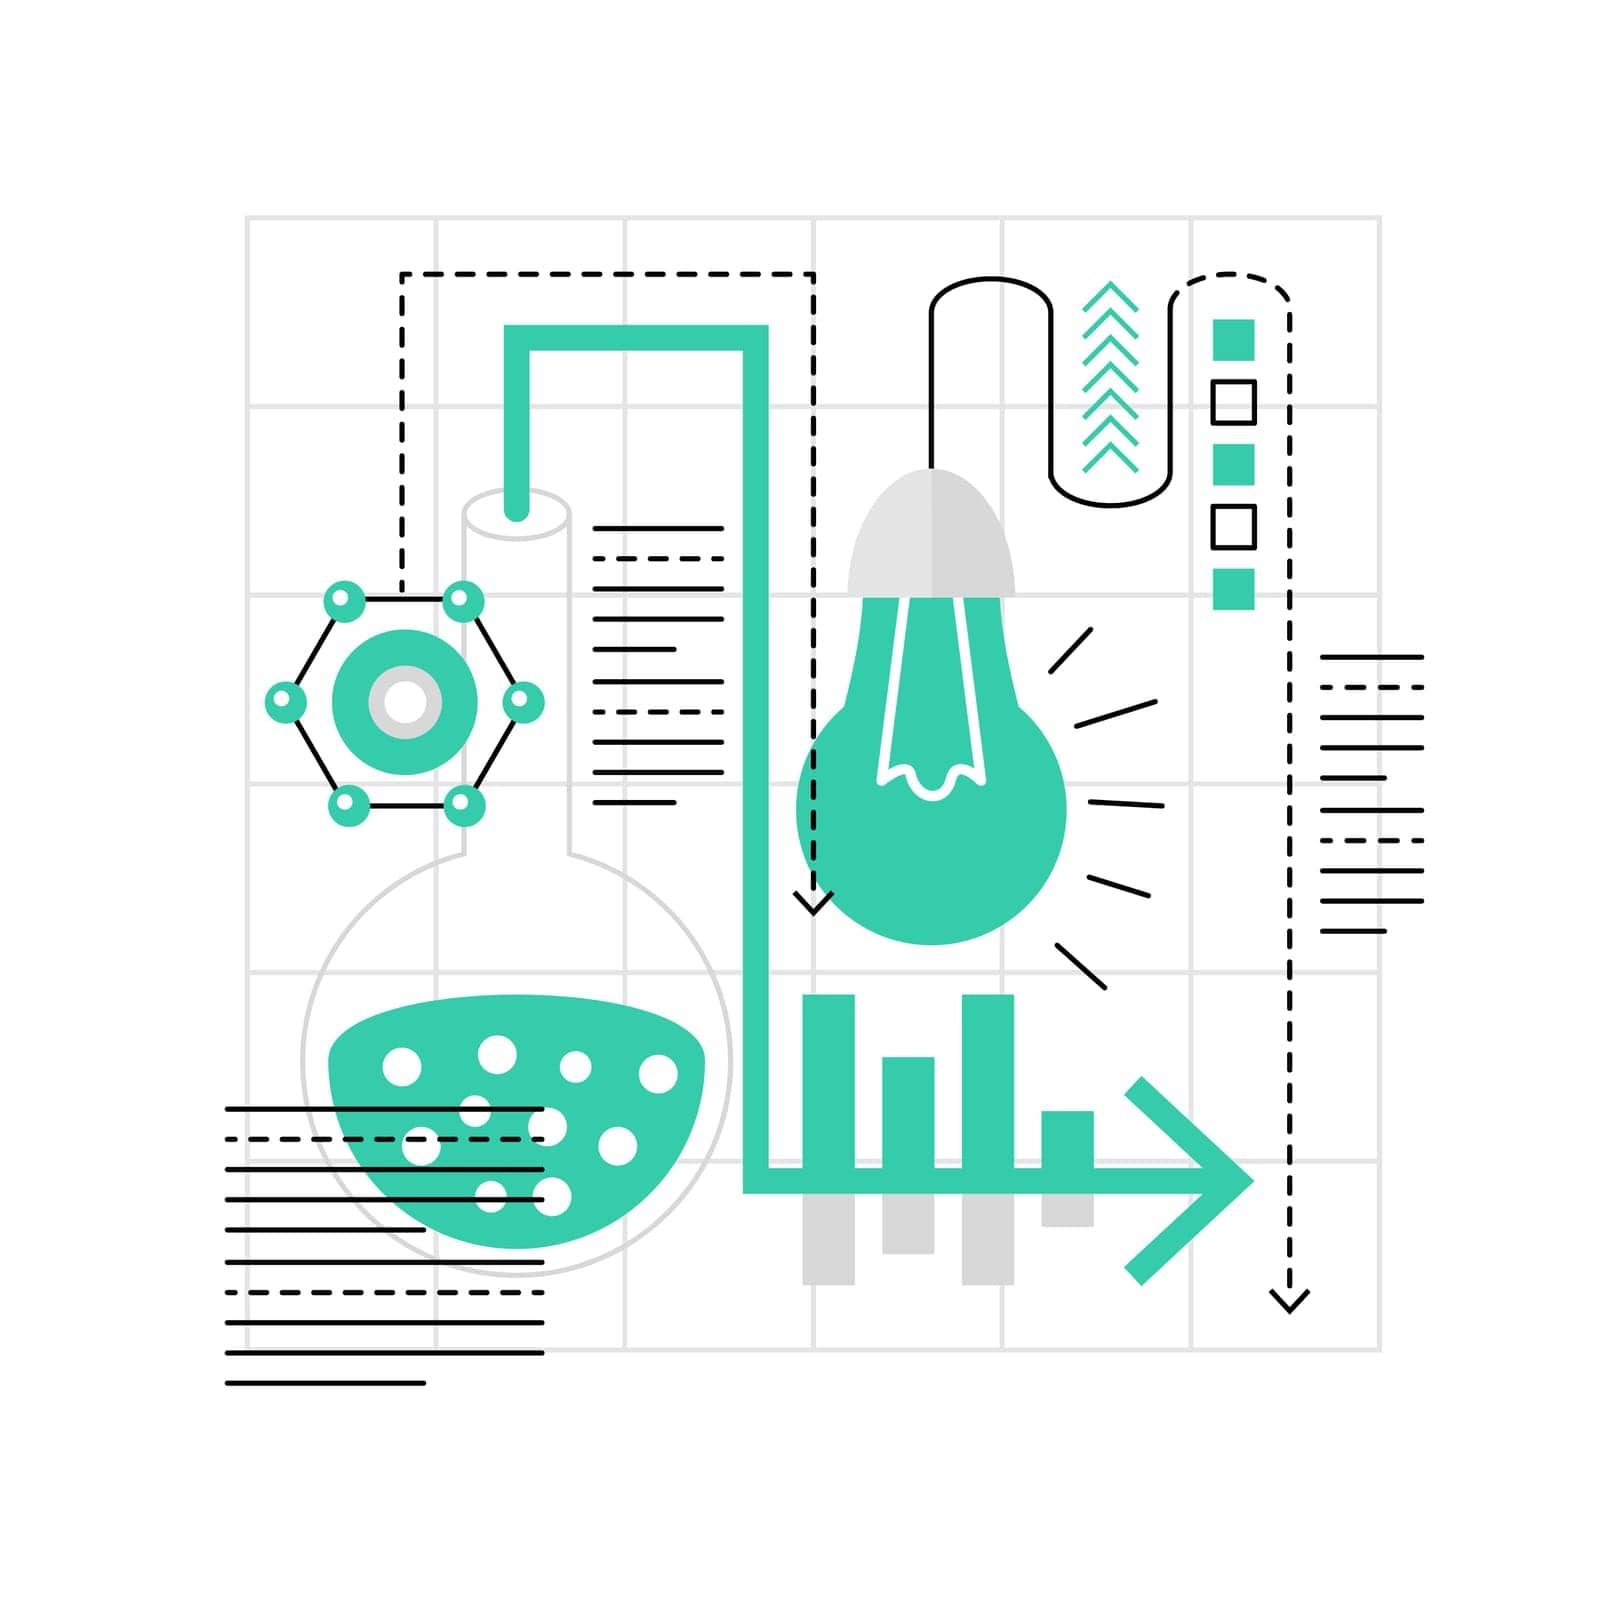 Business startup research. Idea analysis, project action plan graphic icon illustration